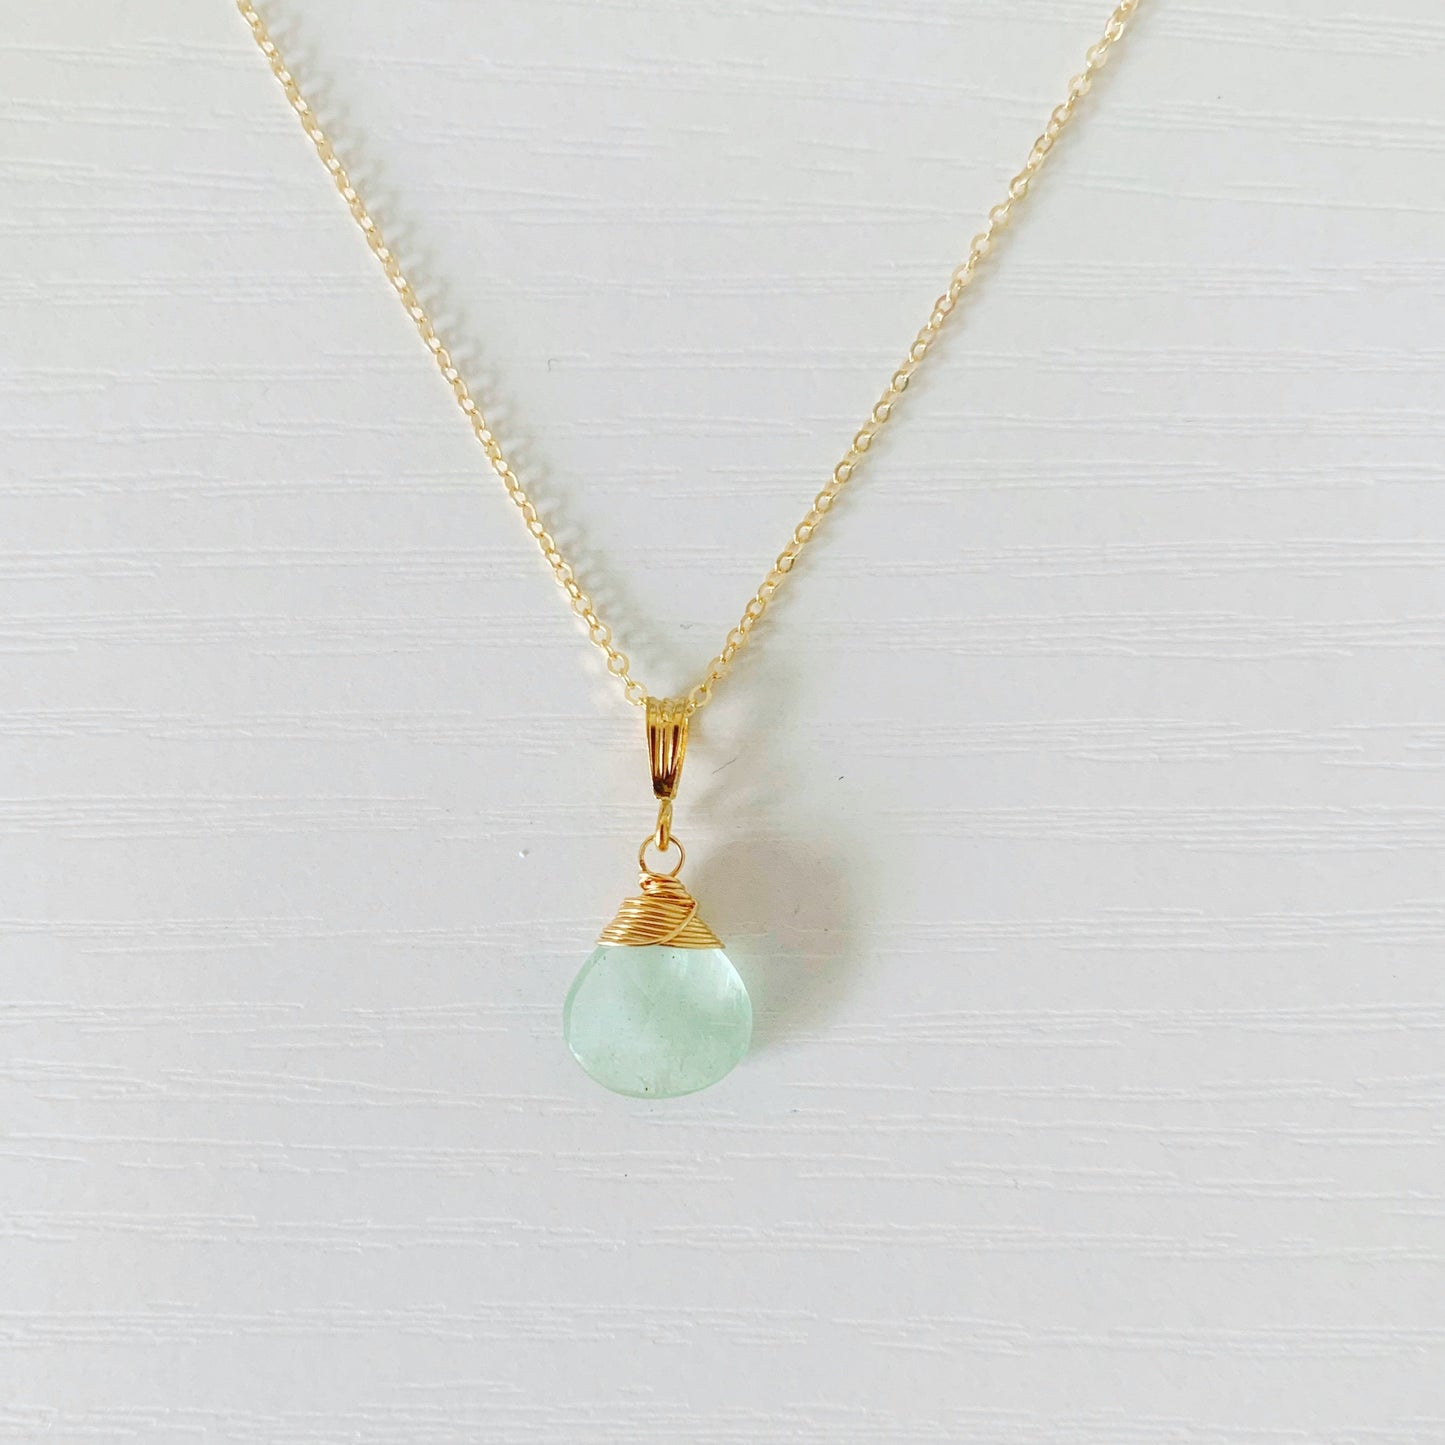 14k gold filled wire wrapped aquamarine briolette suspended from a thin cable chain necklace. this is pictured over a white background